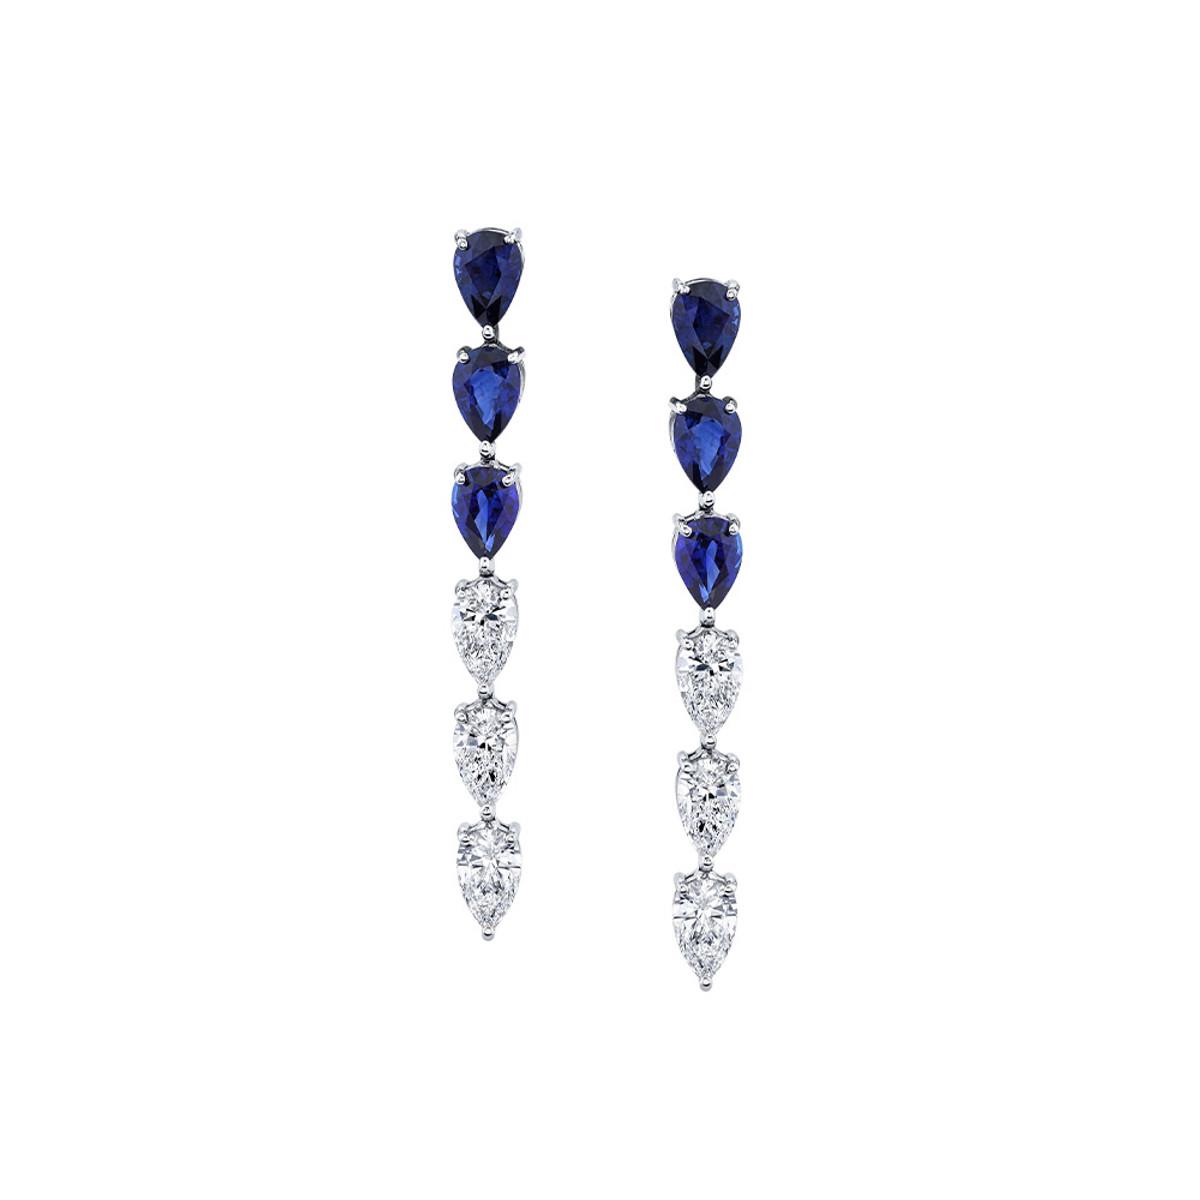 Hyde Park Collection 18K White Gold Sapphire and Diamond Earrings-44017